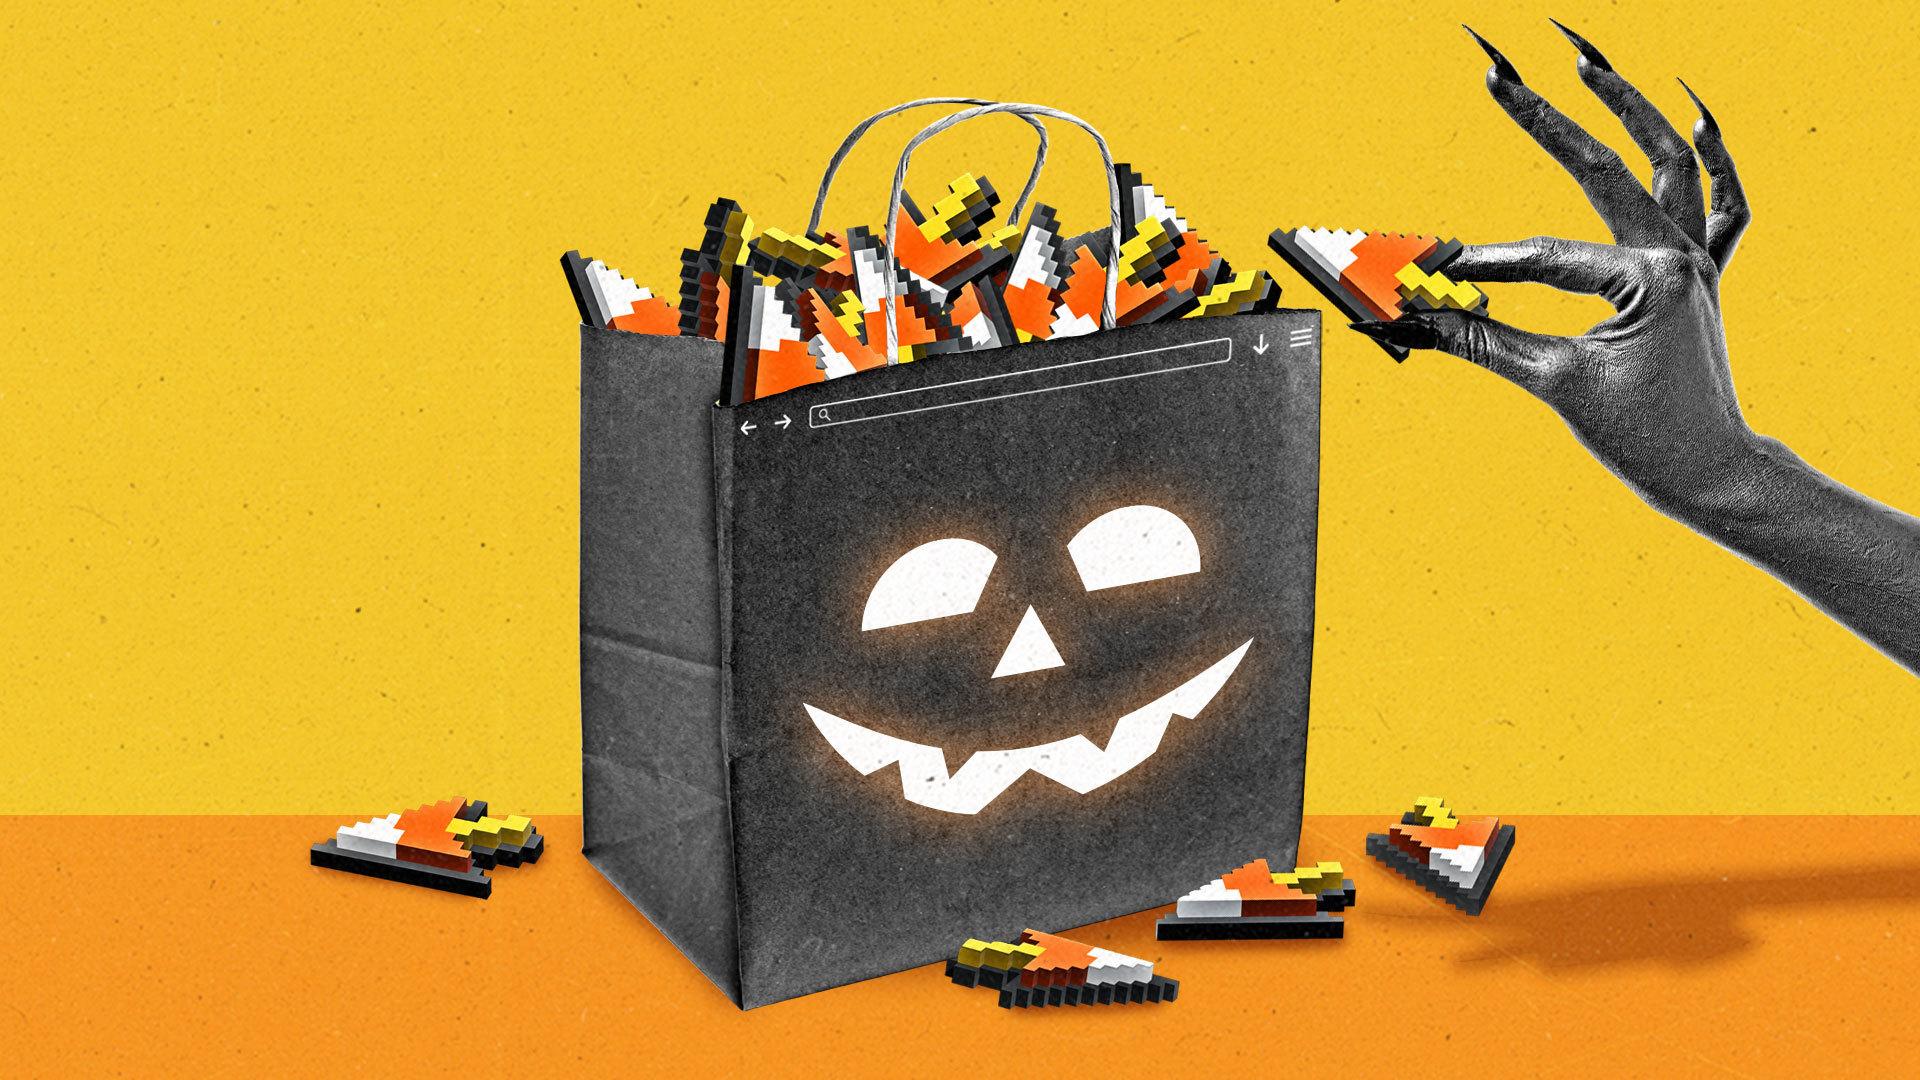 A spooky hand places a candy corn colored cursor arrow into a bag filled with them. The bag has browser UI on the top and a glowing jack-o-lantern face.